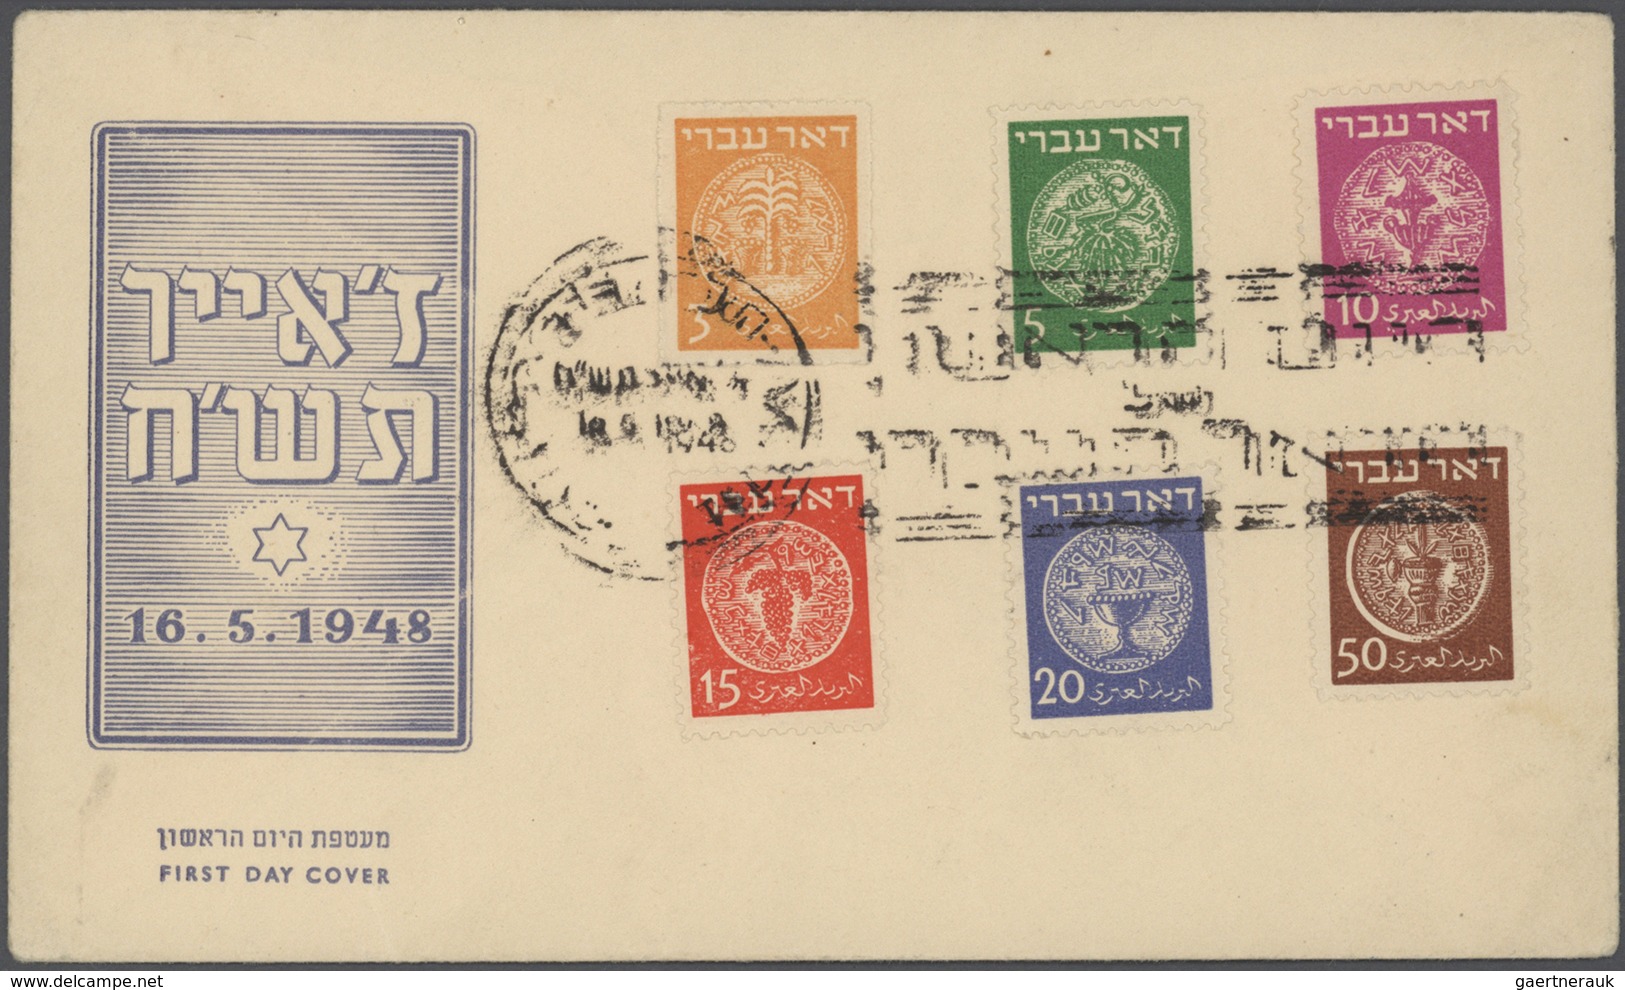 Israel: 1948/1962, accumulation of apprx. 580 covers, comprising a nice range of attractive franking